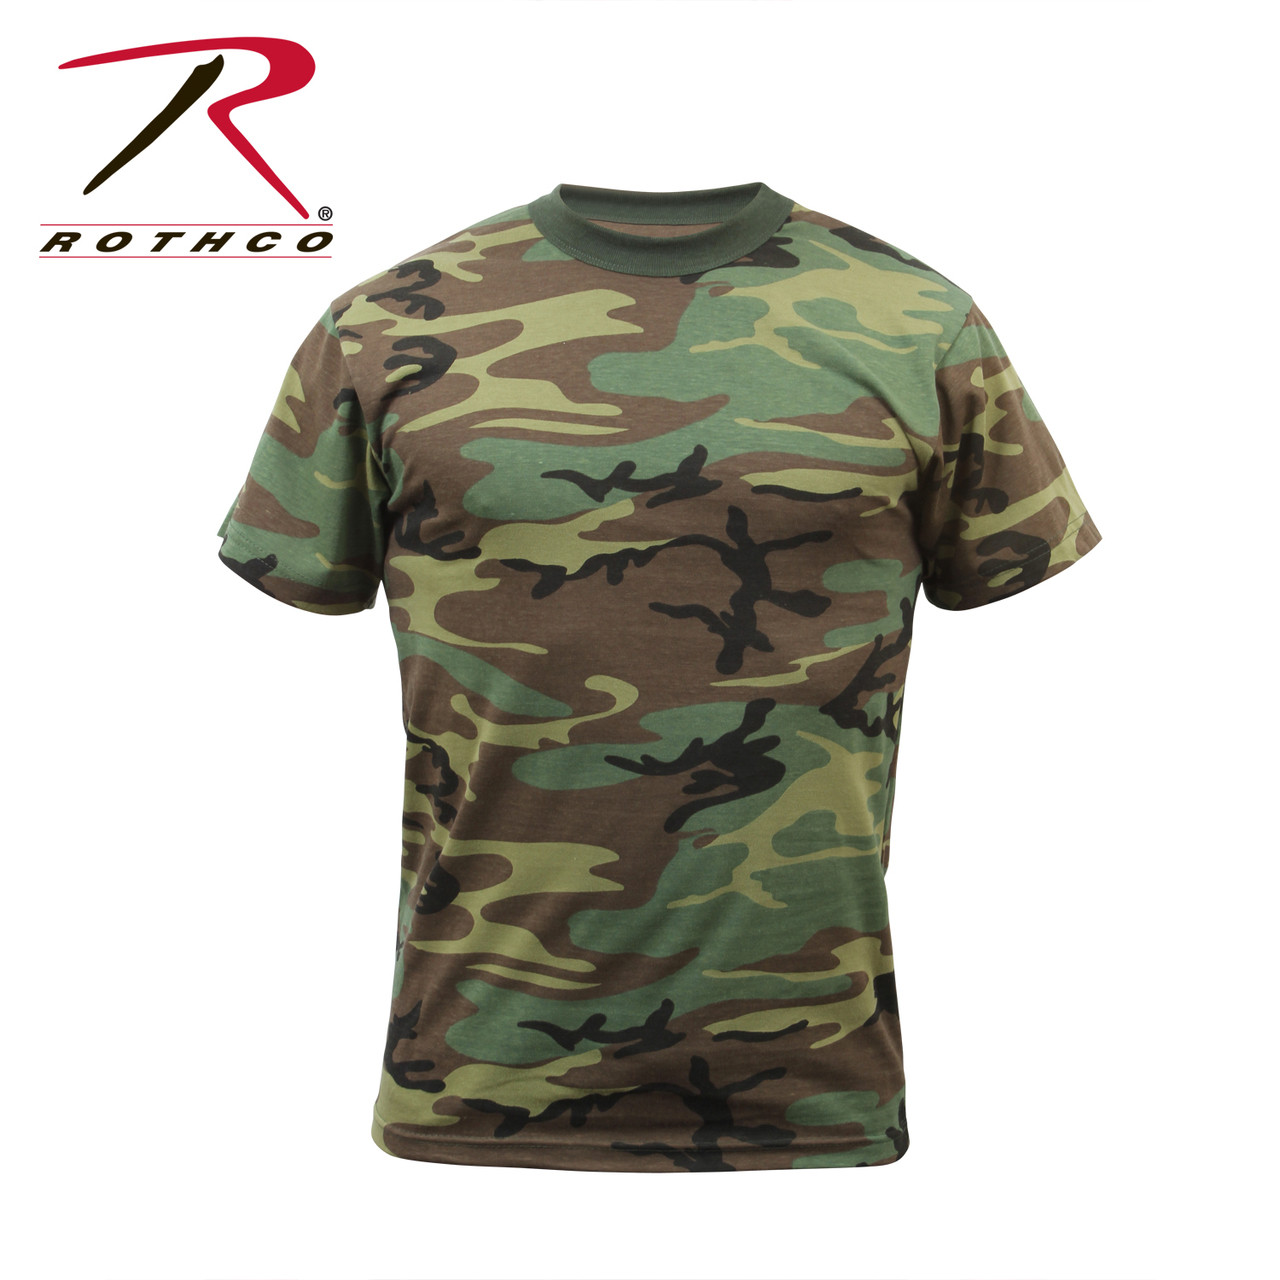 Rothco Camo T-Shirts - Tactical Asia - Philippines